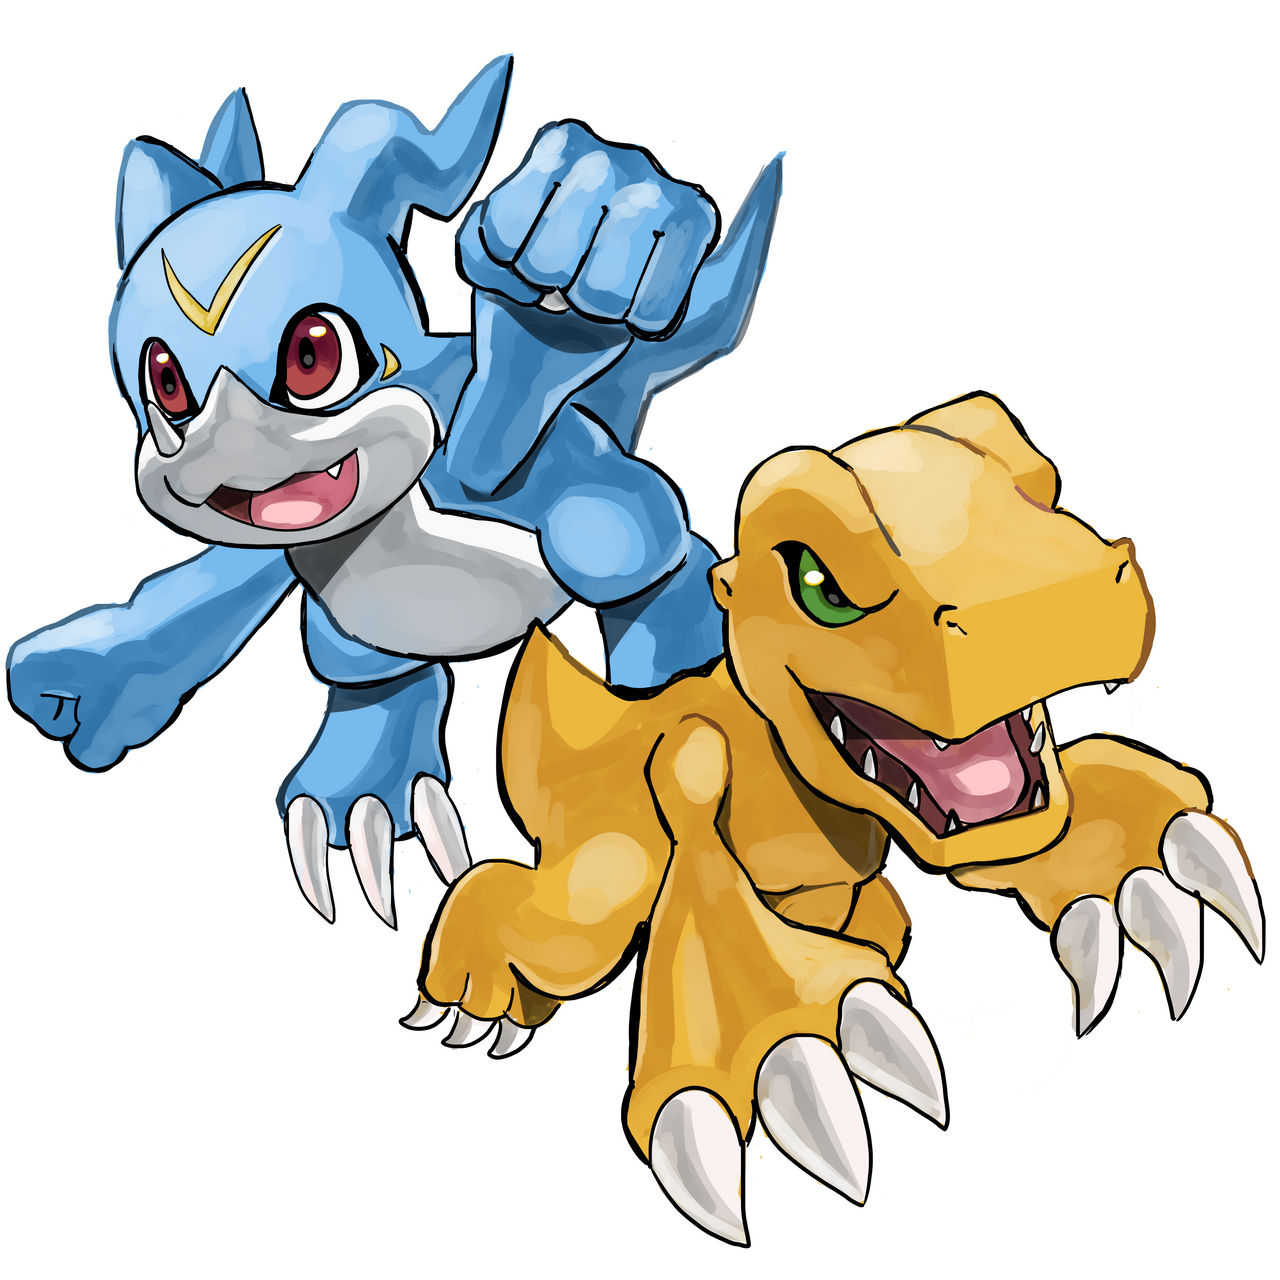 Agumon and Greymon Alcohol Marker Drawing by OrangeSquidy64 on DeviantArt